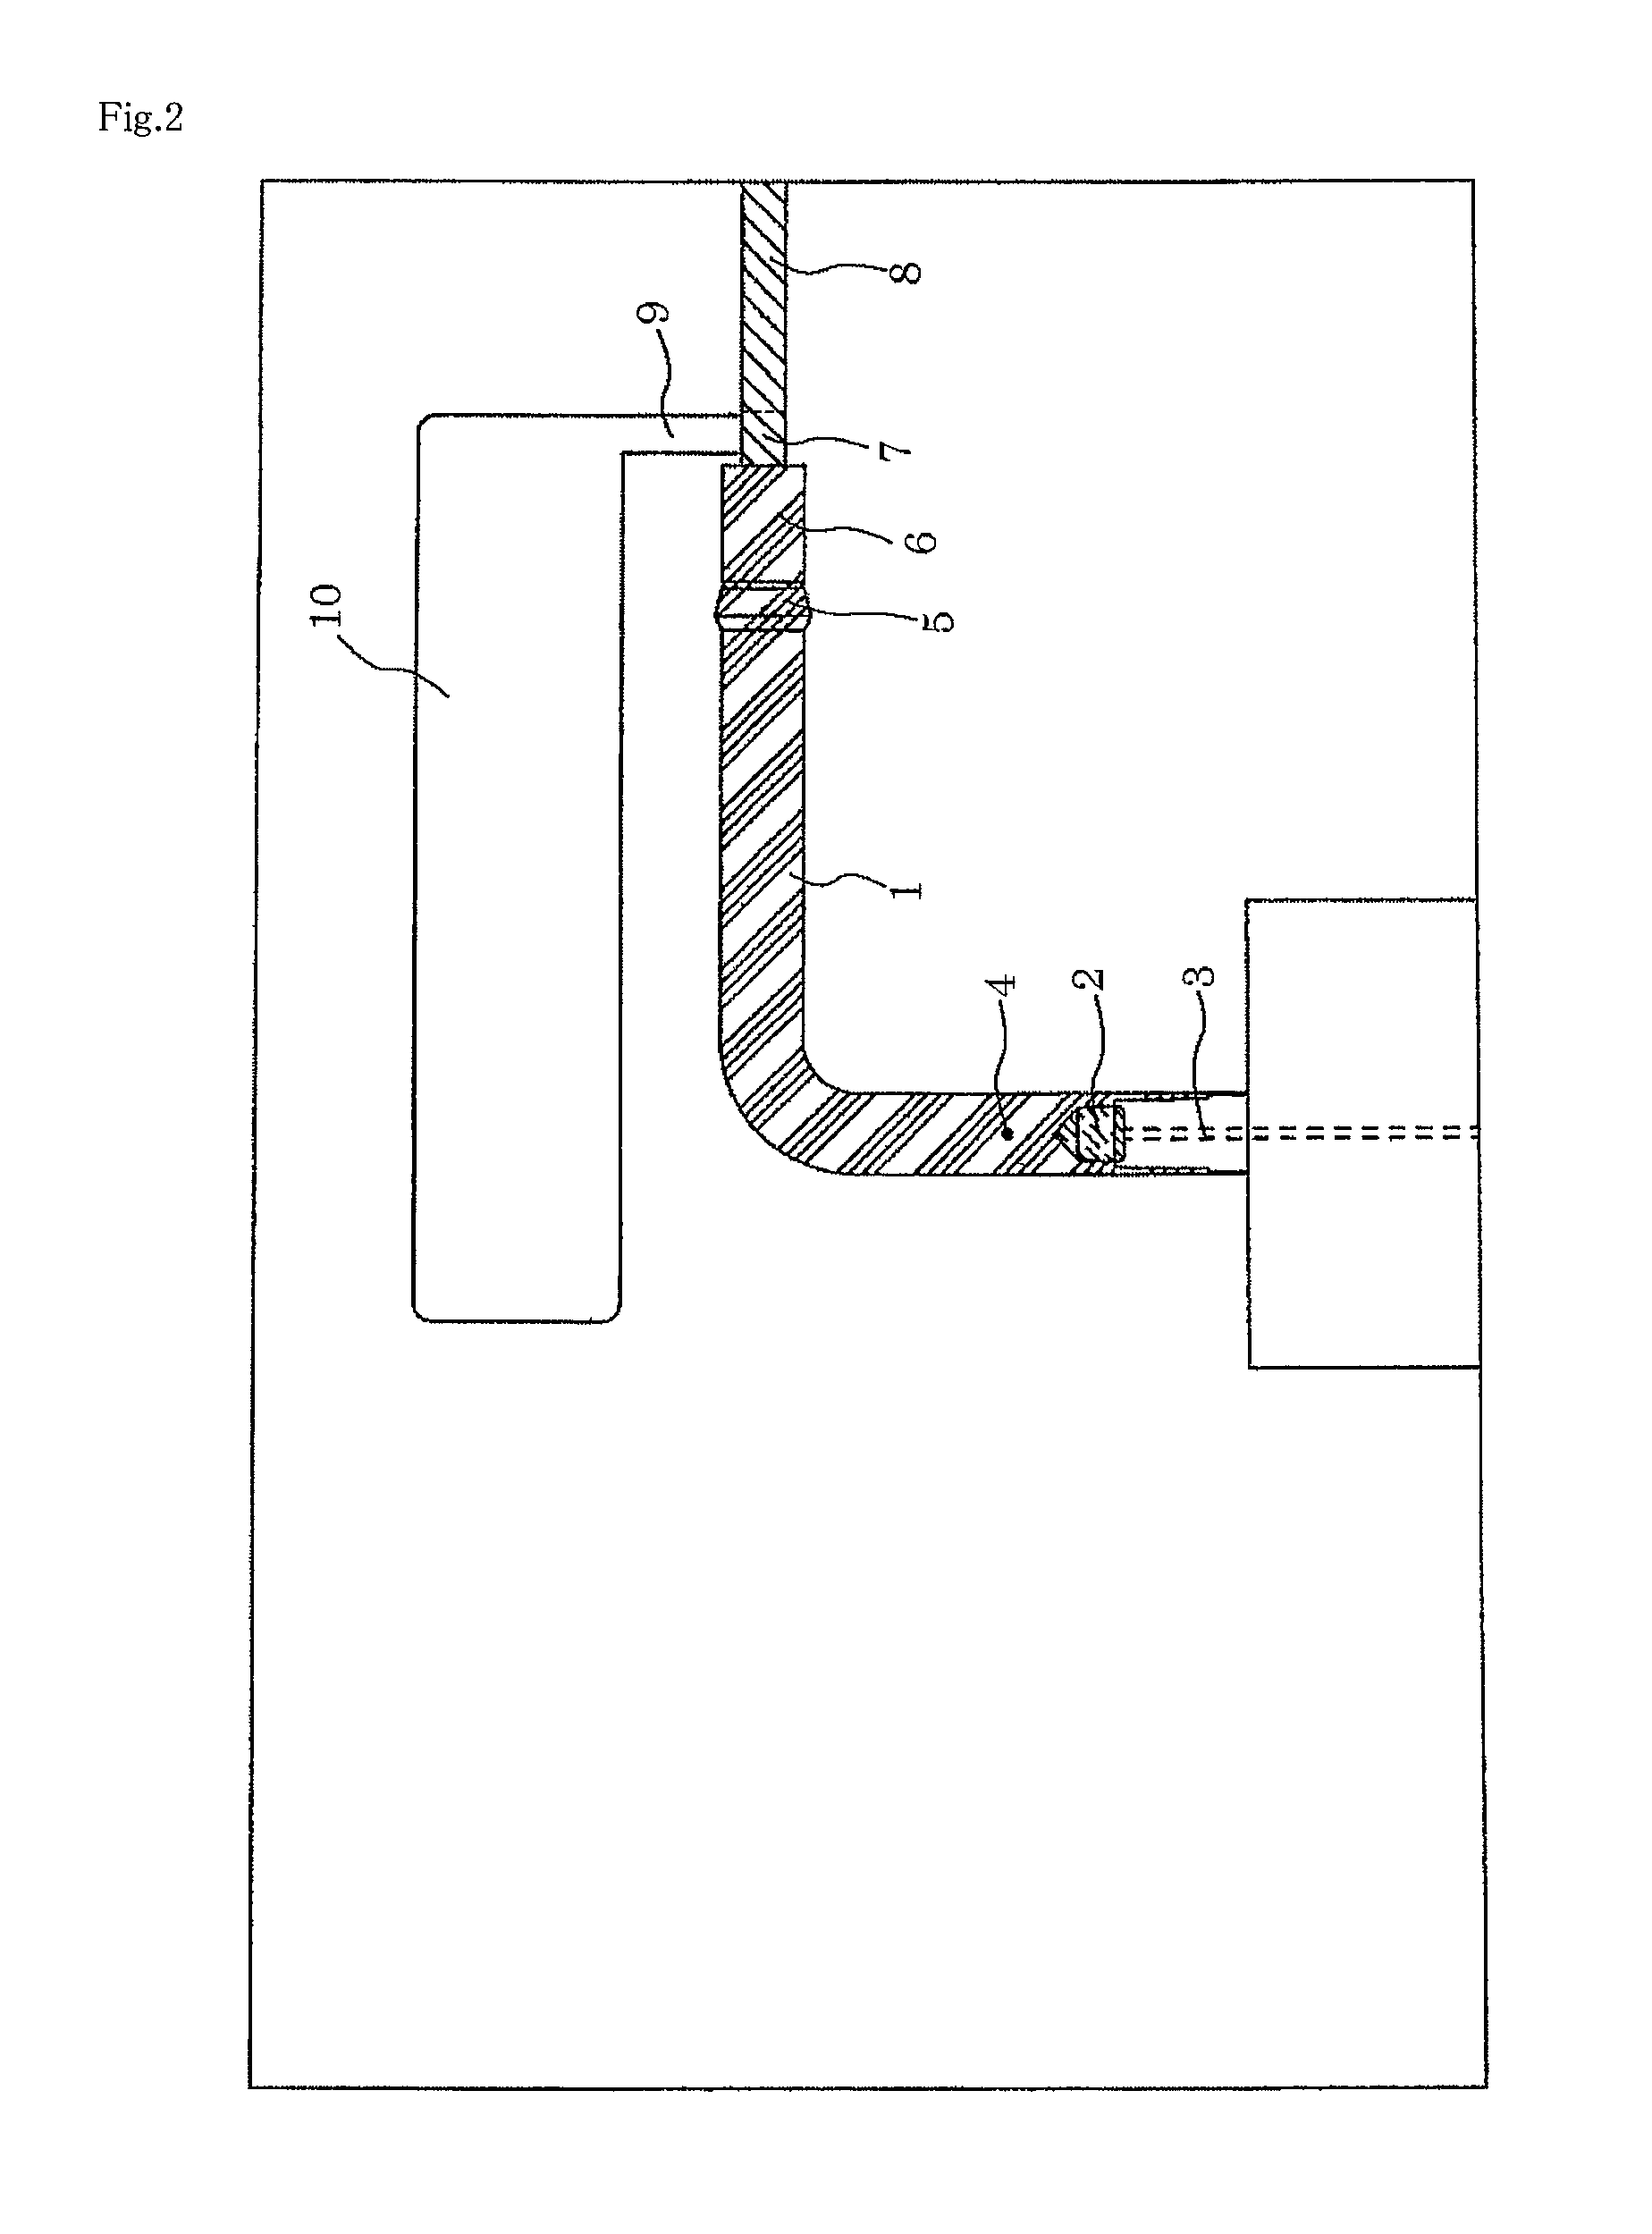 Hollow body molding device